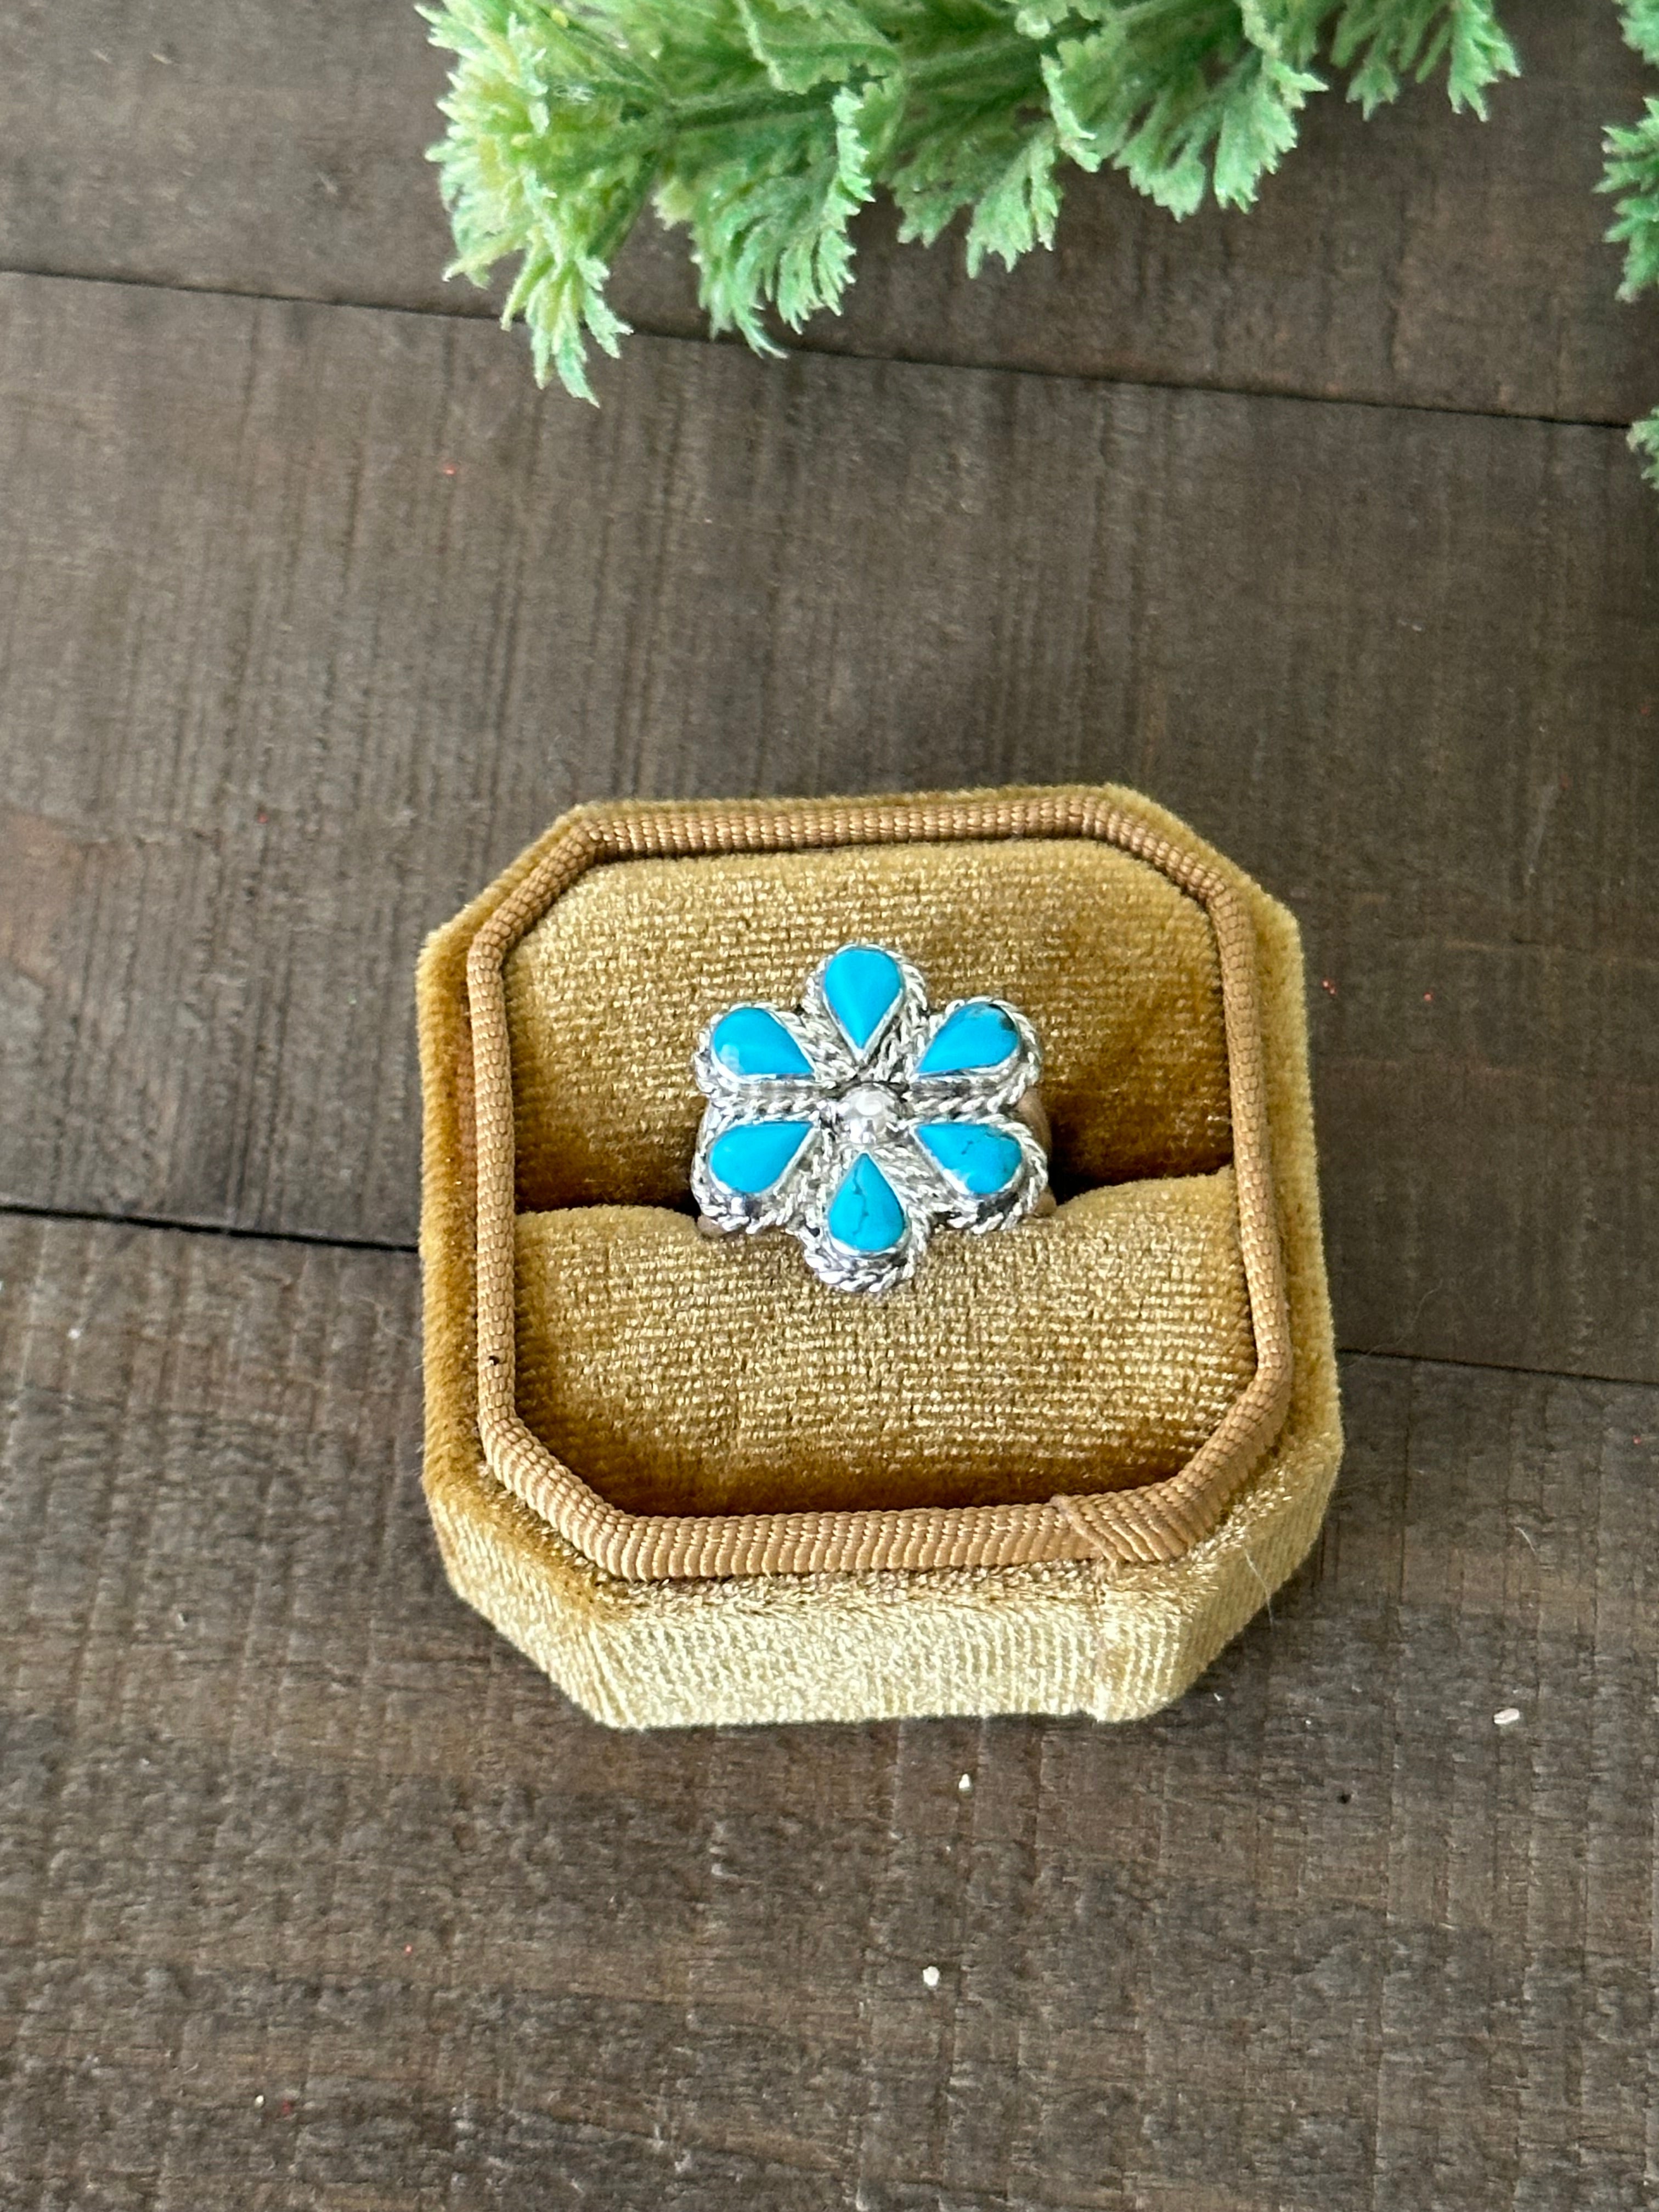 Navajo Made Turquoise & Sterling Silver Ring Size 7.25